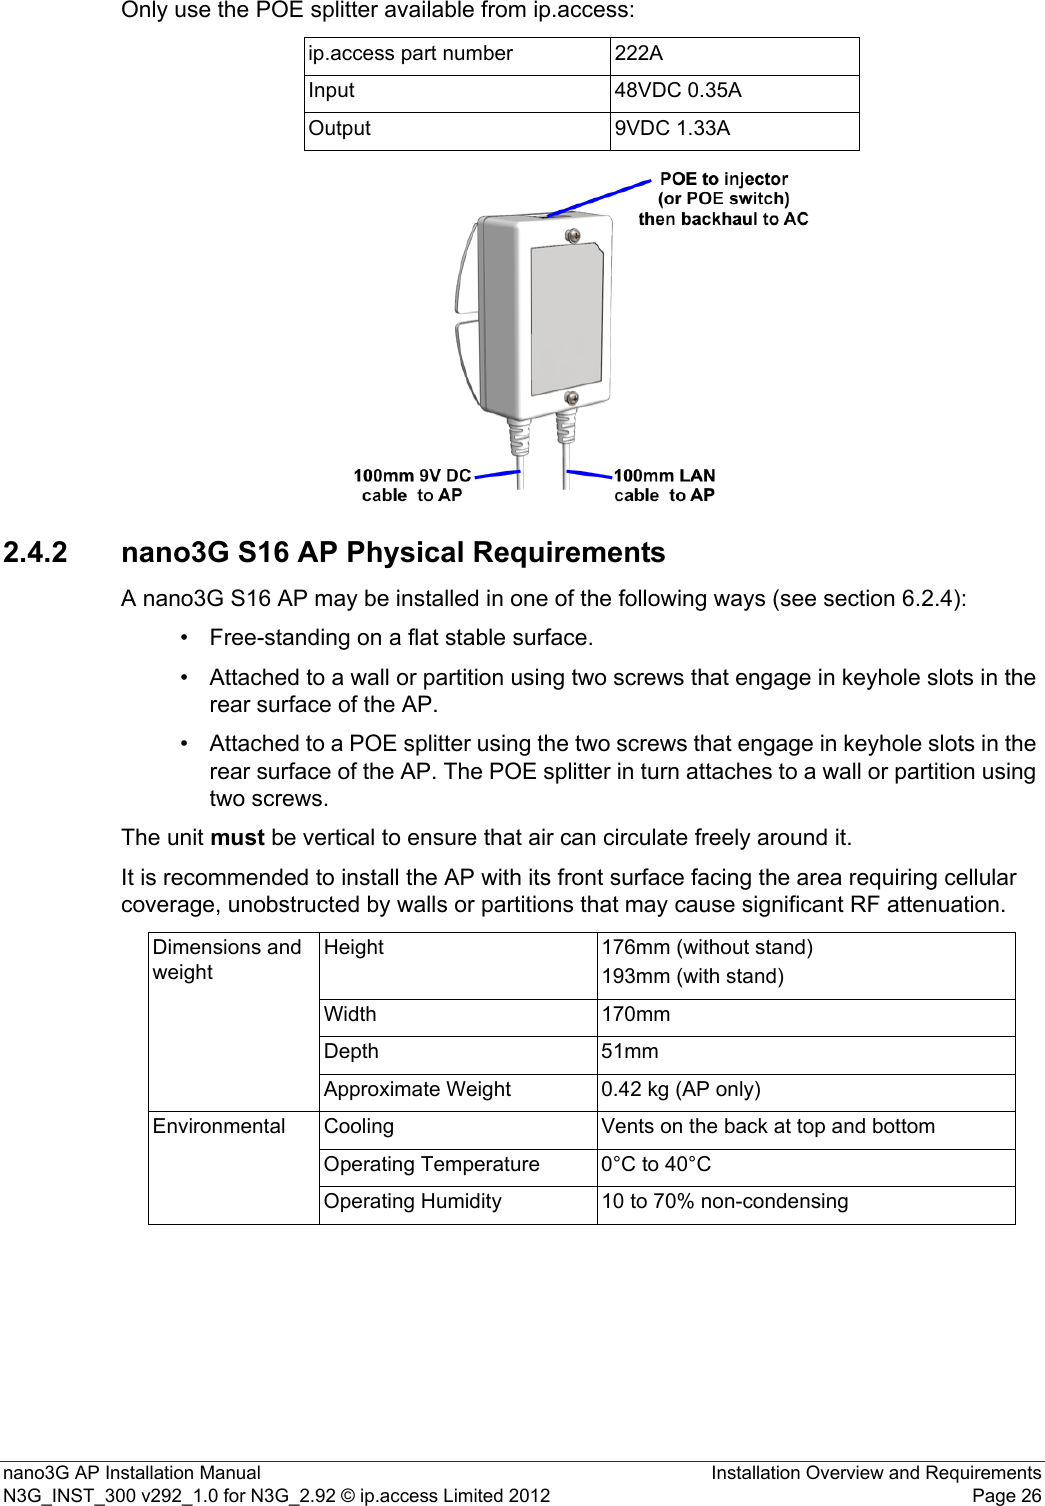 nano3G AP Installation Manual Installation Overview and RequirementsN3G_INST_300 v292_1.0 for N3G_2.92 © ip.access Limited 2012 Page 26Only use the POE splitter available from ip.access:2.4.2 nano3G S16 AP Physical RequirementsA nano3G S16 AP may be installed in one of the following ways (see section 6.2.4):• Free-standing on a flat stable surface.• Attached to a wall or partition using two screws that engage in keyhole slots in the rear surface of the AP.• Attached to a POE splitter using the two screws that engage in keyhole slots in the rear surface of the AP. The POE splitter in turn attaches to a wall or partition using two screws.The unit must be vertical to ensure that air can circulate freely around it.It is recommended to install the AP with its front surface facing the area requiring cellular coverage, unobstructed by walls or partitions that may cause significant RF attenuation.ip.access part number 222AInput 48VDC 0.35AOutput 9VDC 1.33ADimensions and weightHeight 176mm (without stand)193mm (with stand)Width 170mmDepth 51mmApproximate Weight 0.42 kg (AP only)Environmental Cooling Vents on the back at top and bottomOperating Temperature 0°C to 40°COperating Humidity 10 to 70% non-condensing